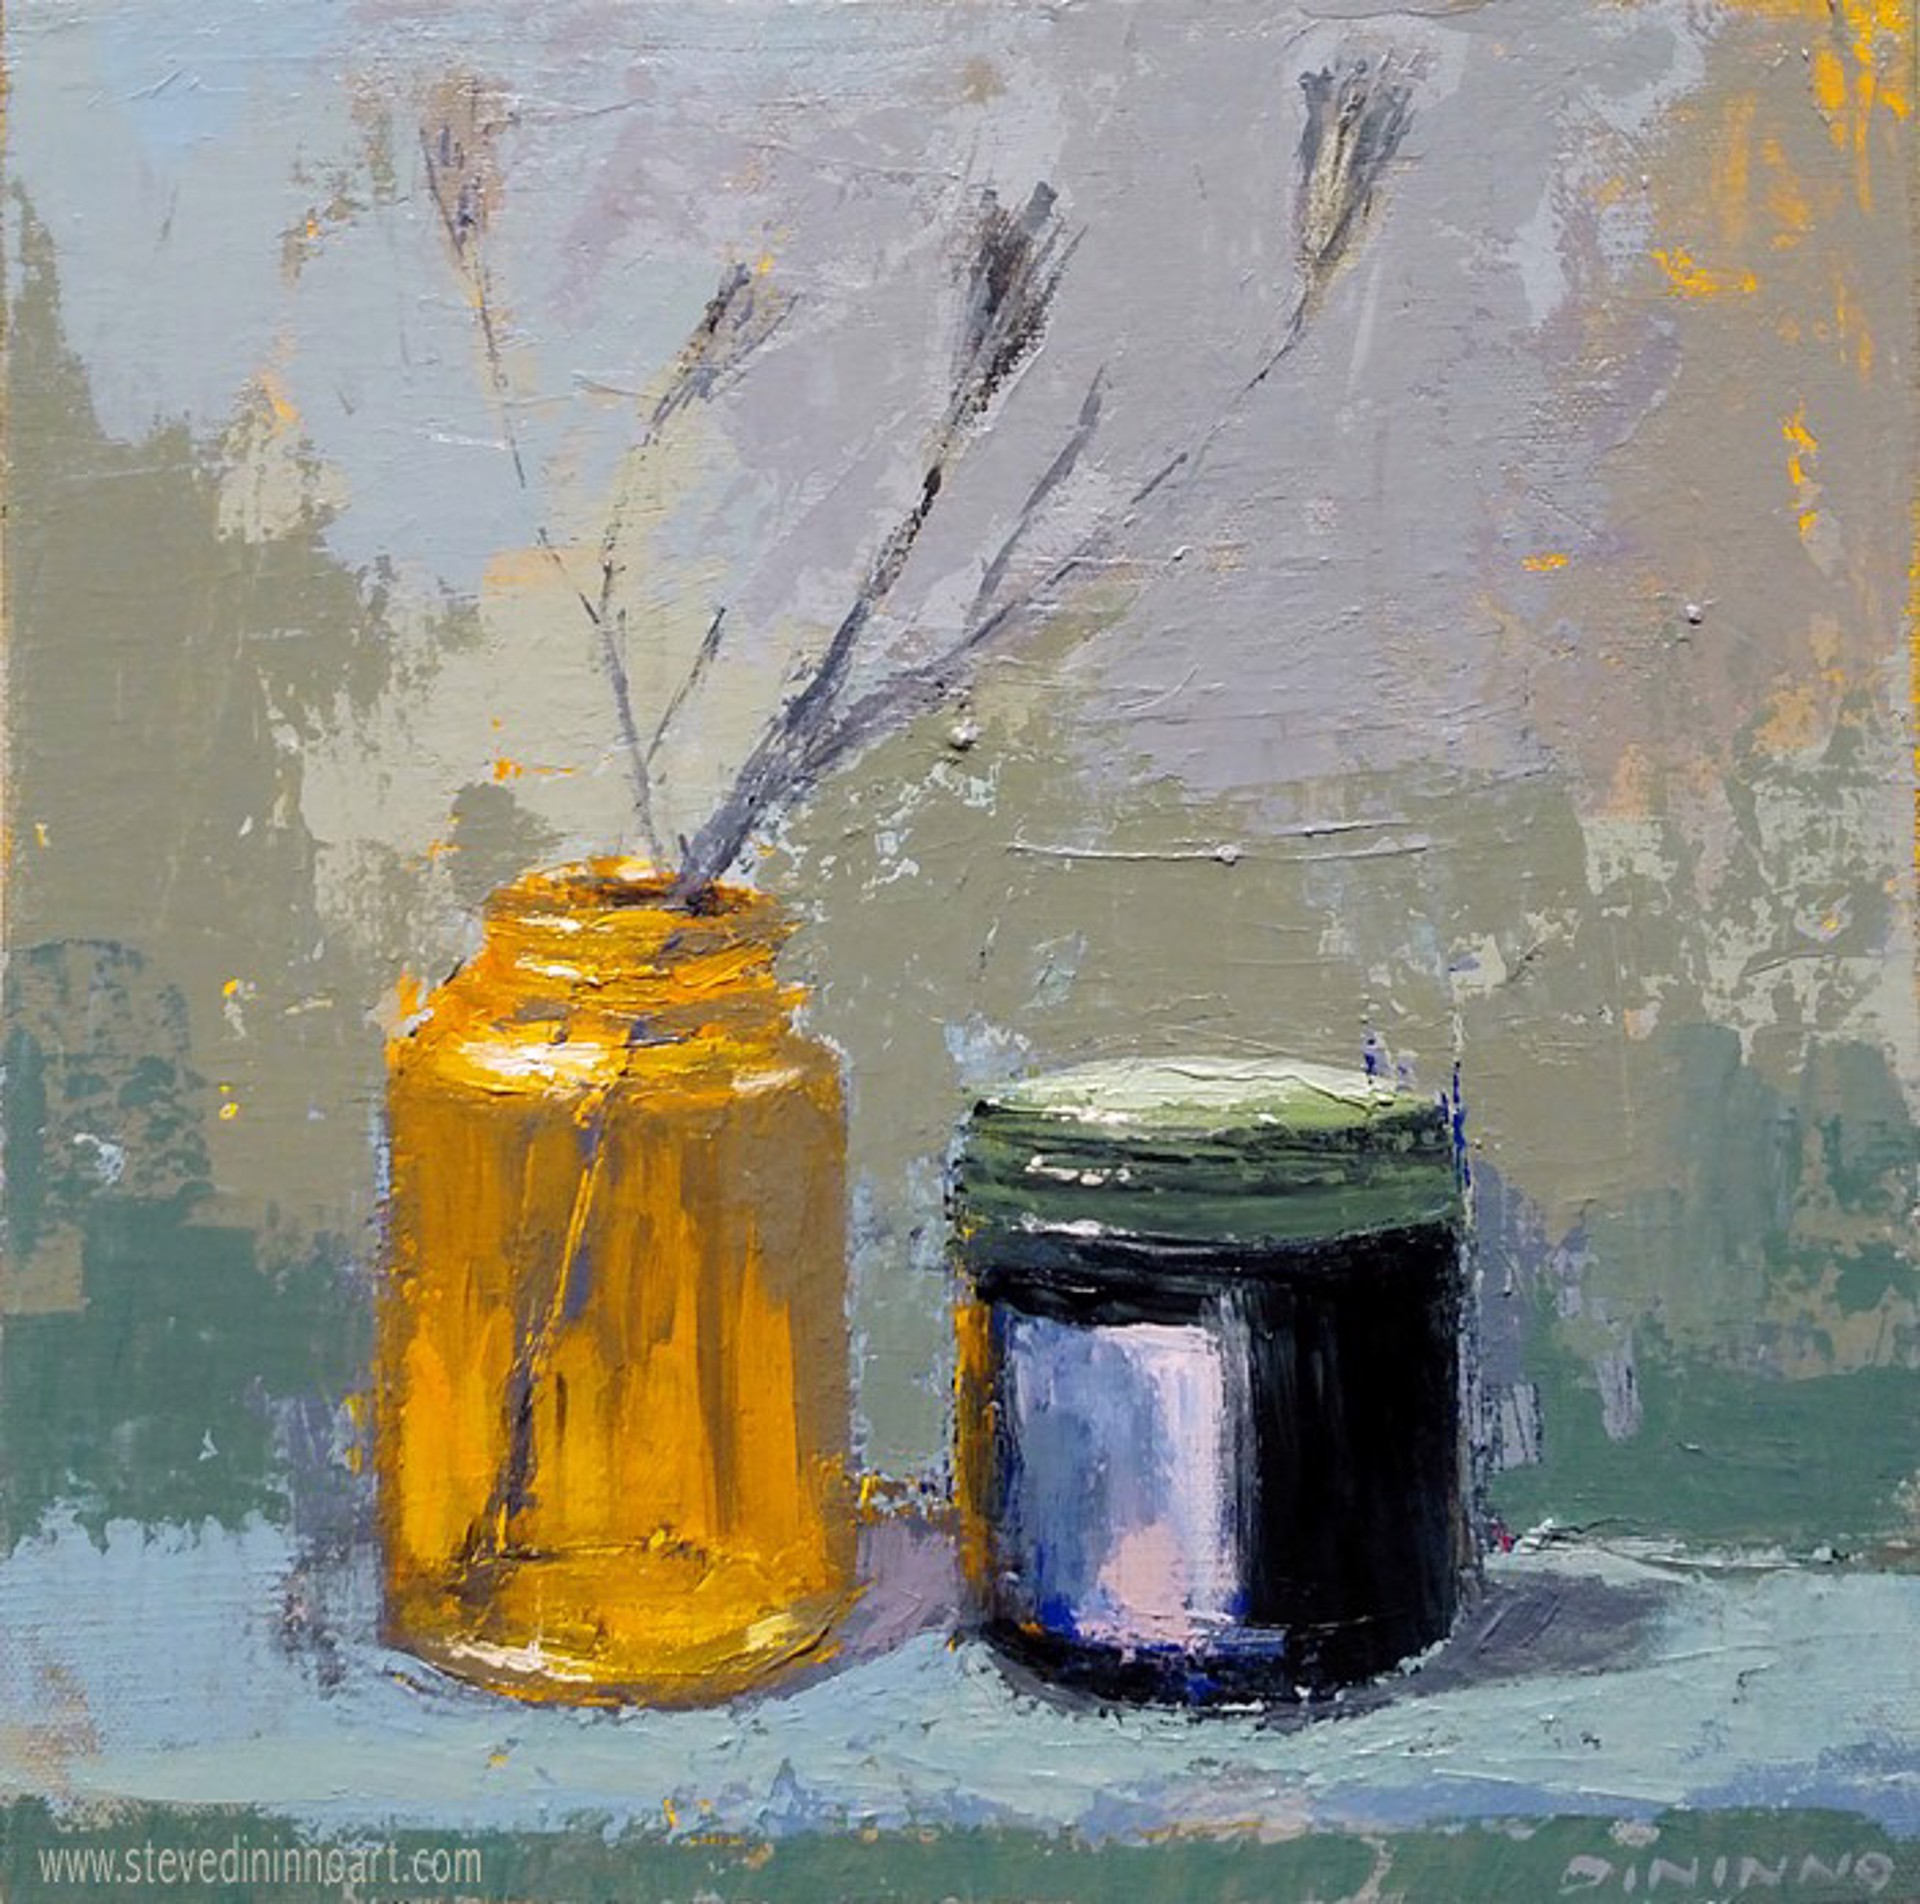 Still Life (Jars and Dried Flowers) by Steve Dininno